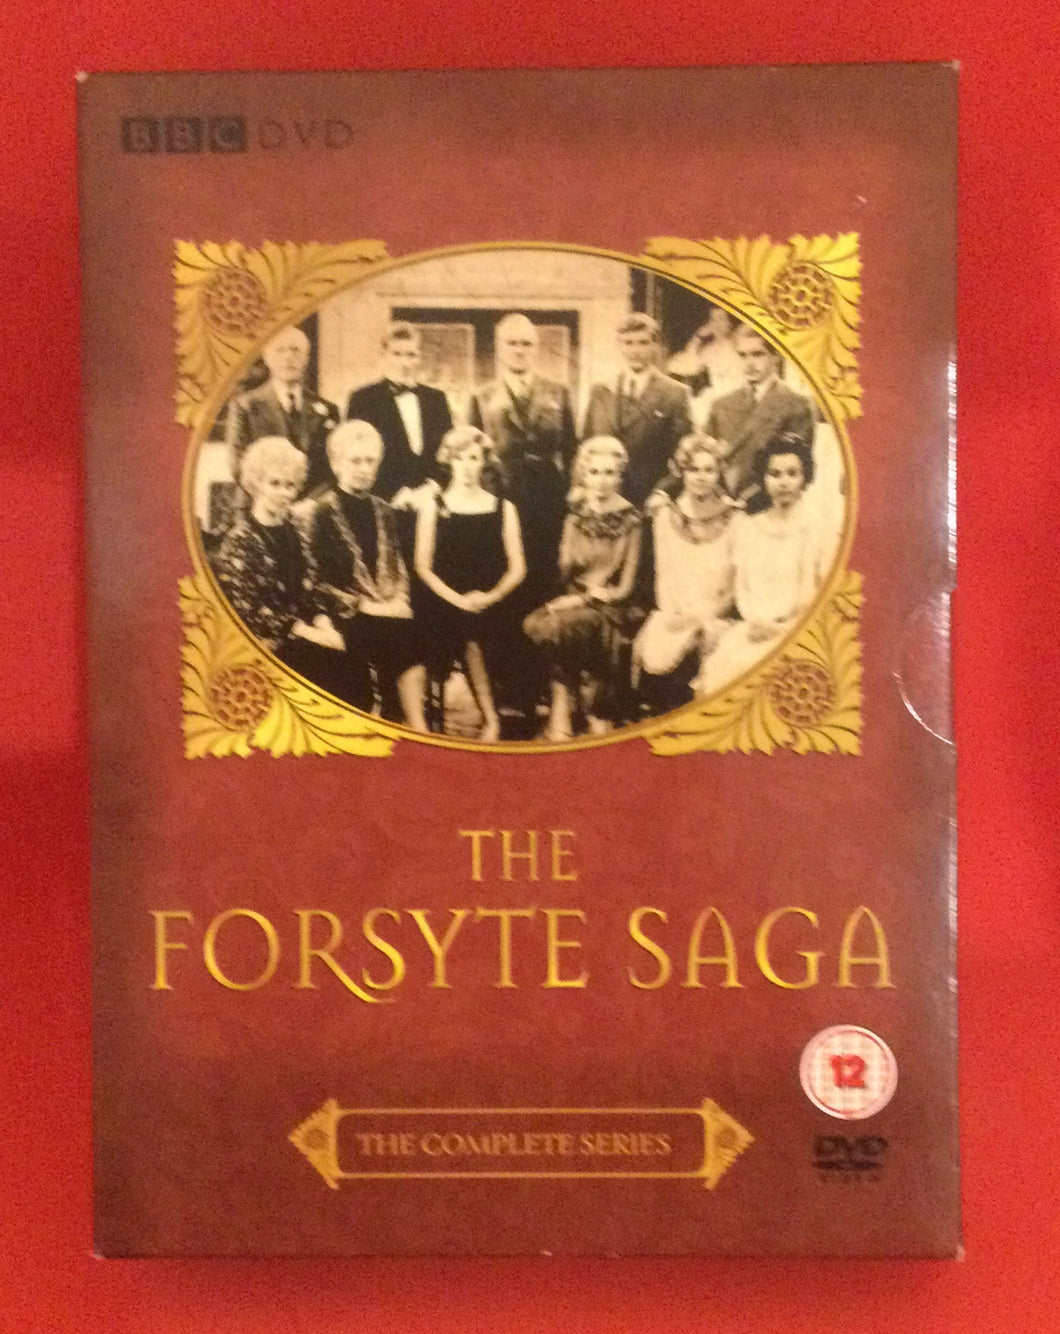 The Forsyte Saga: The Complete Series (1967) DVD USED